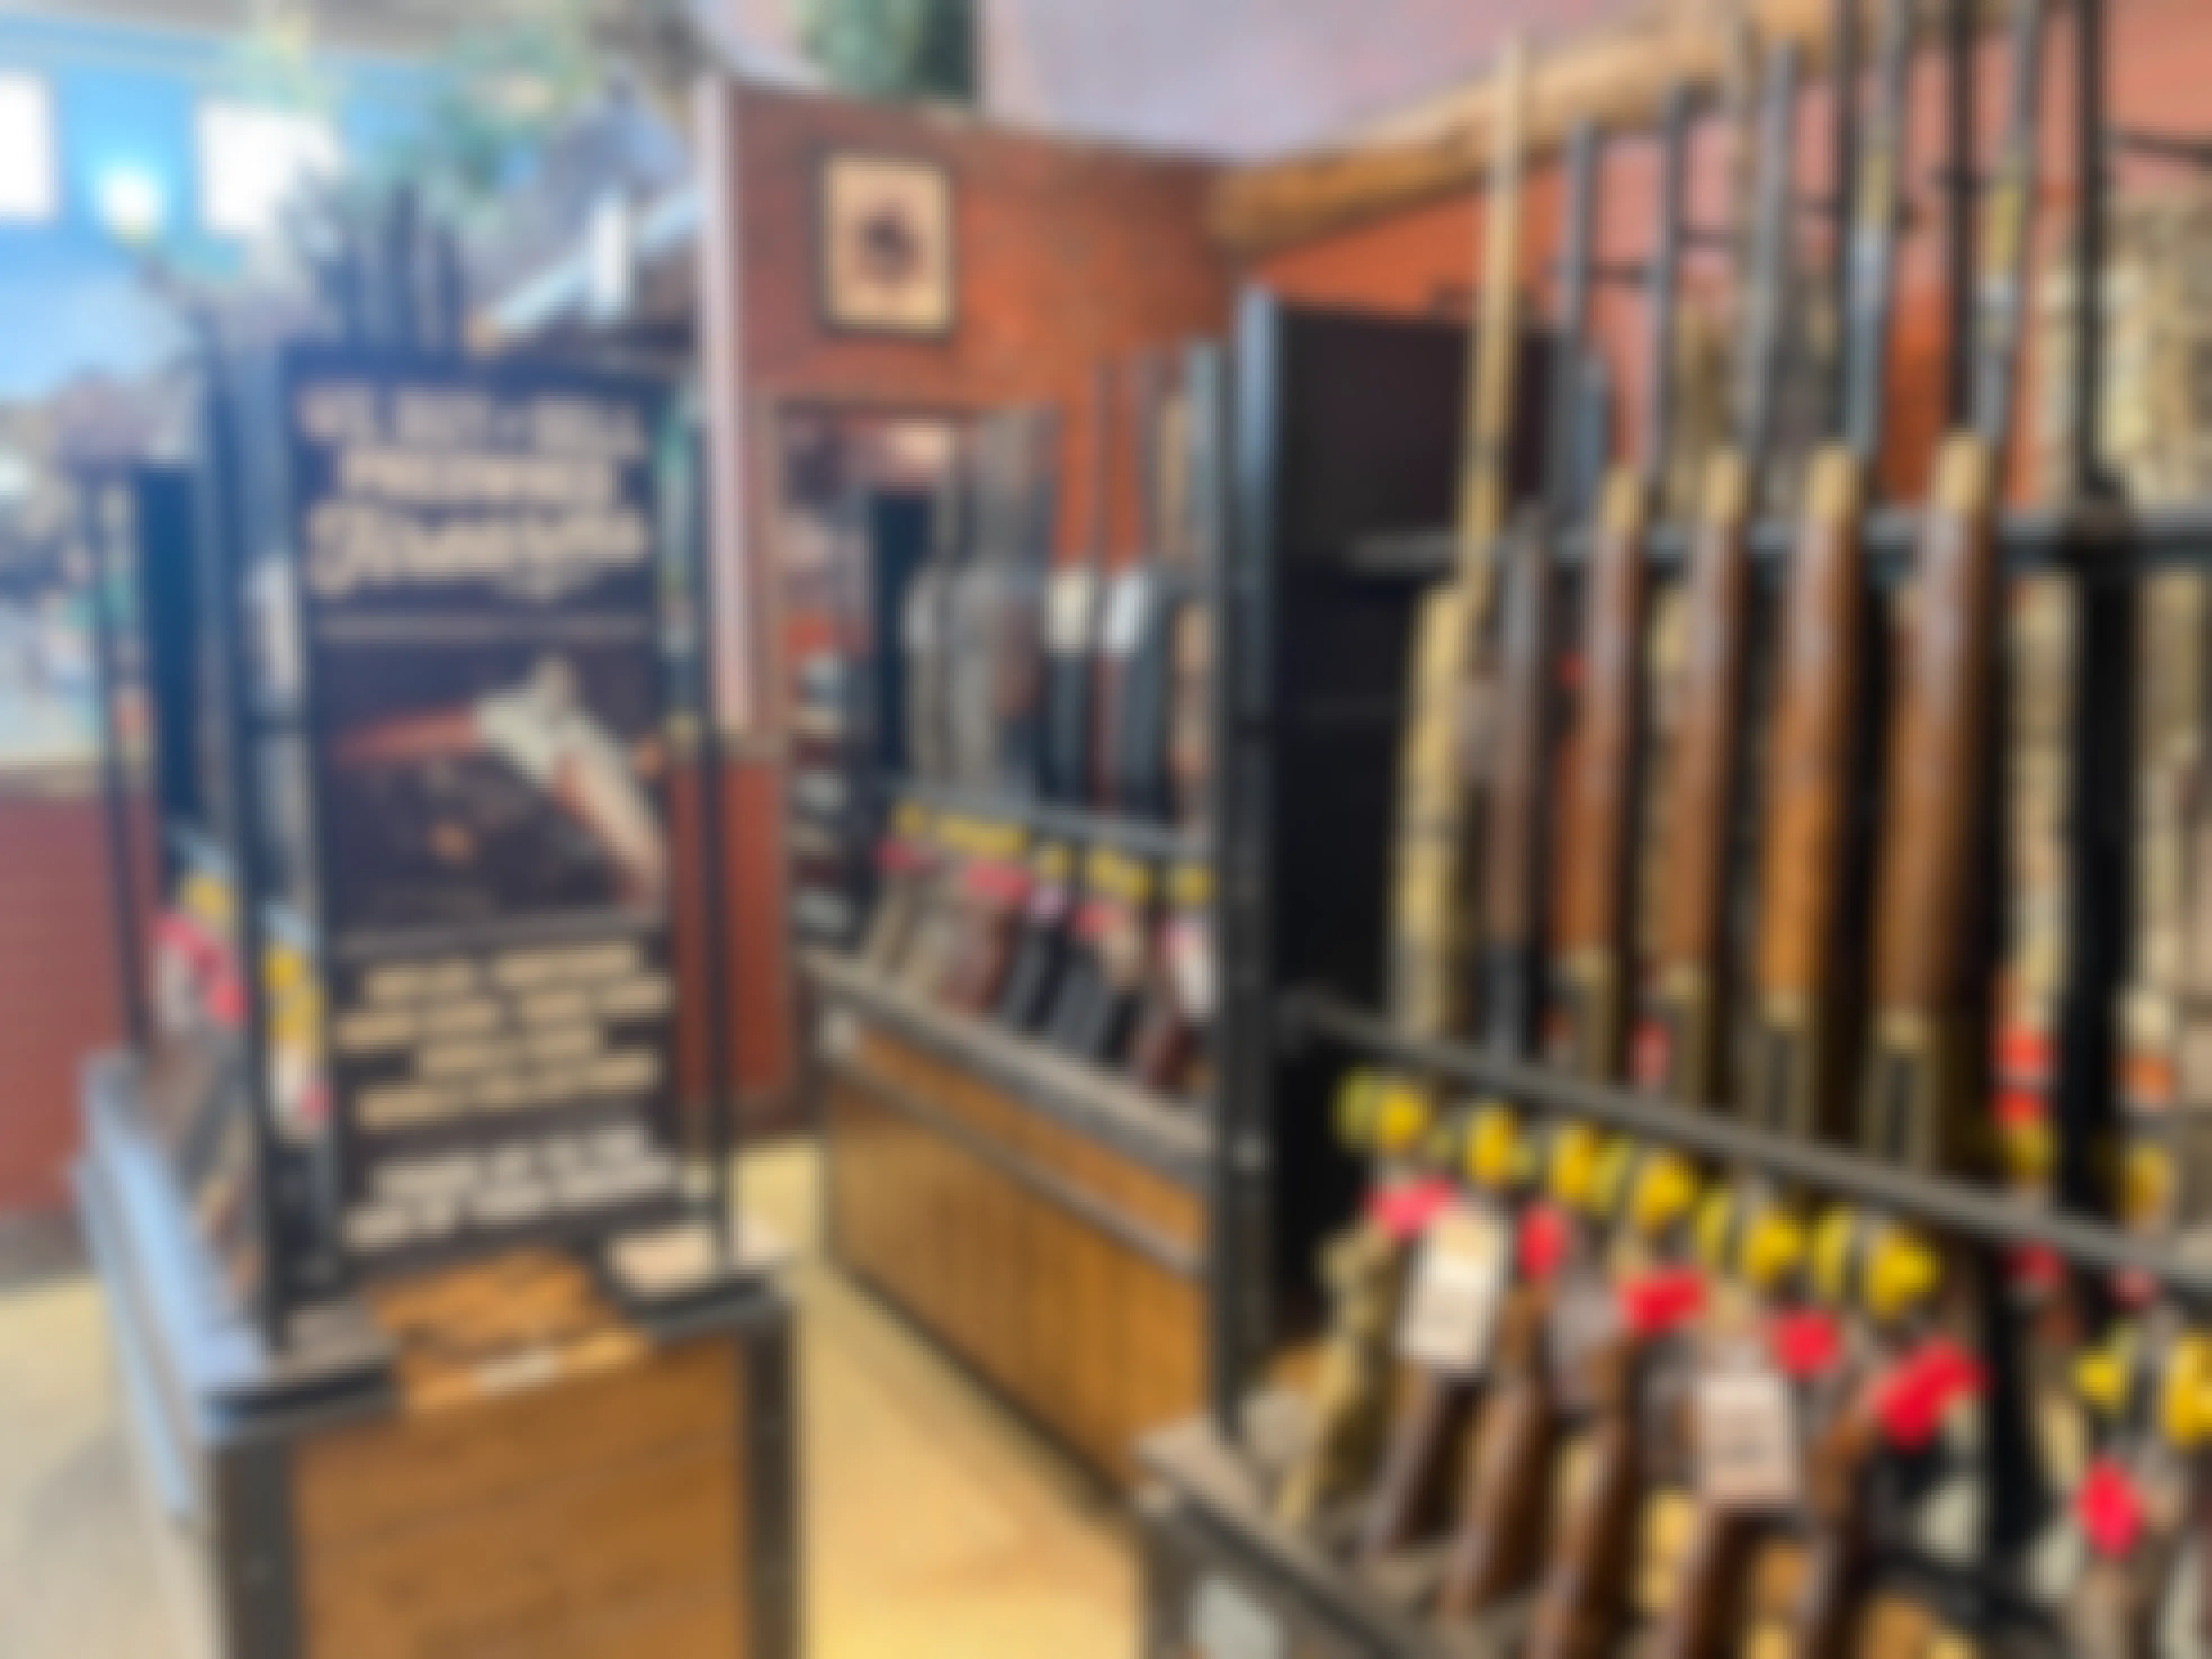 The firearm display inside Cabela's next to a sign that reads, "We buy & sell preowned firearms